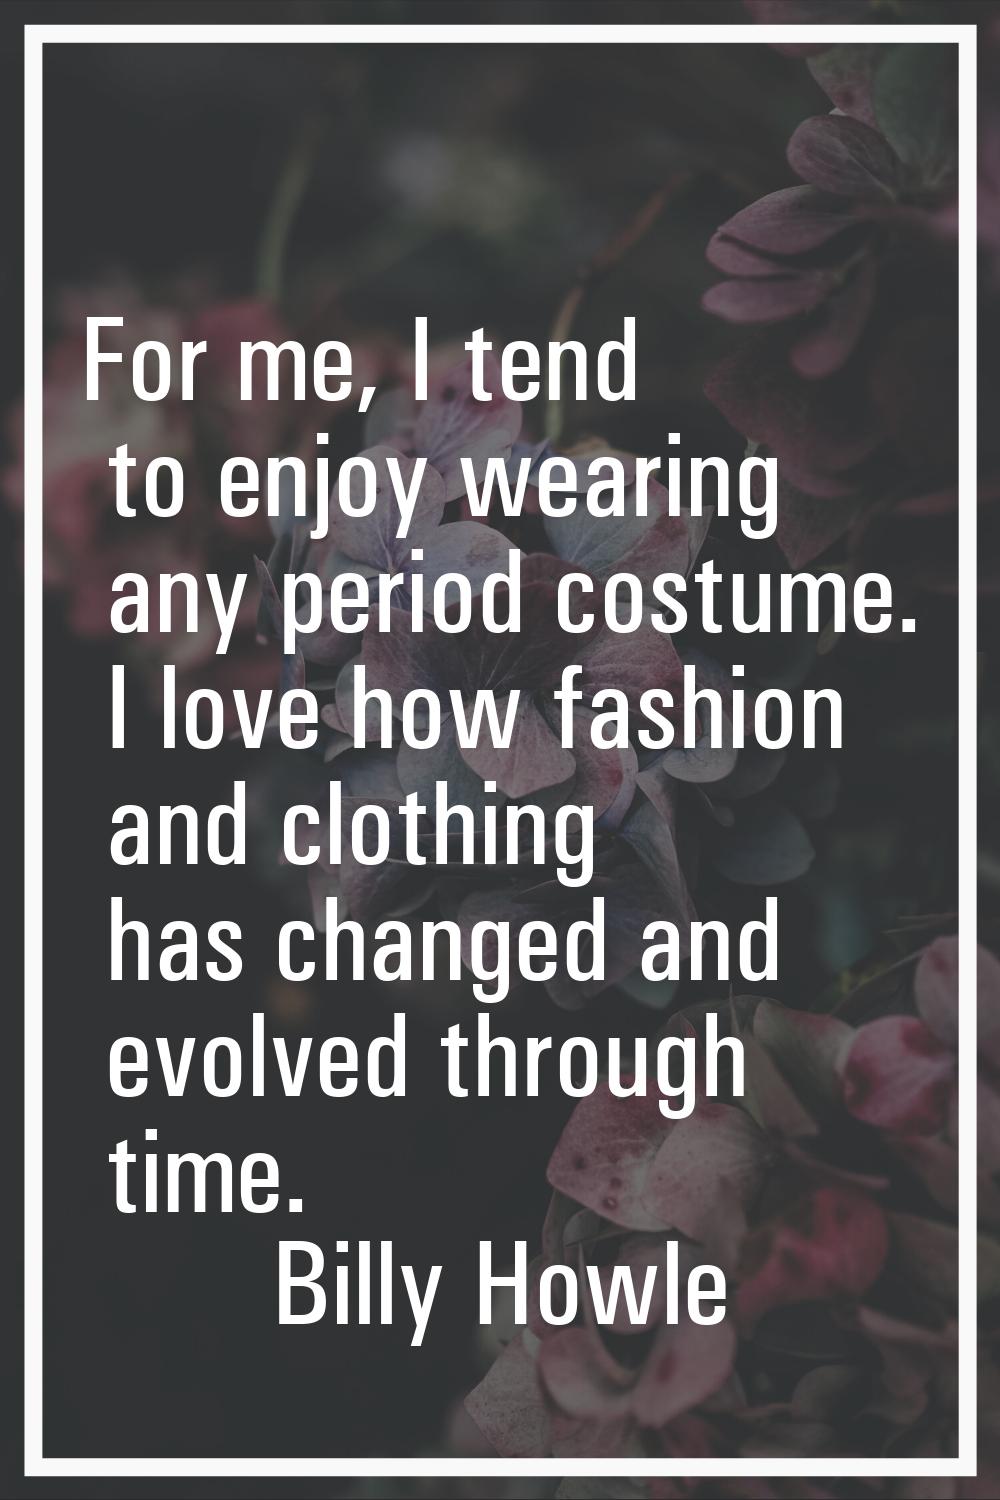 For me, I tend to enjoy wearing any period costume. I love how fashion and clothing has changed and